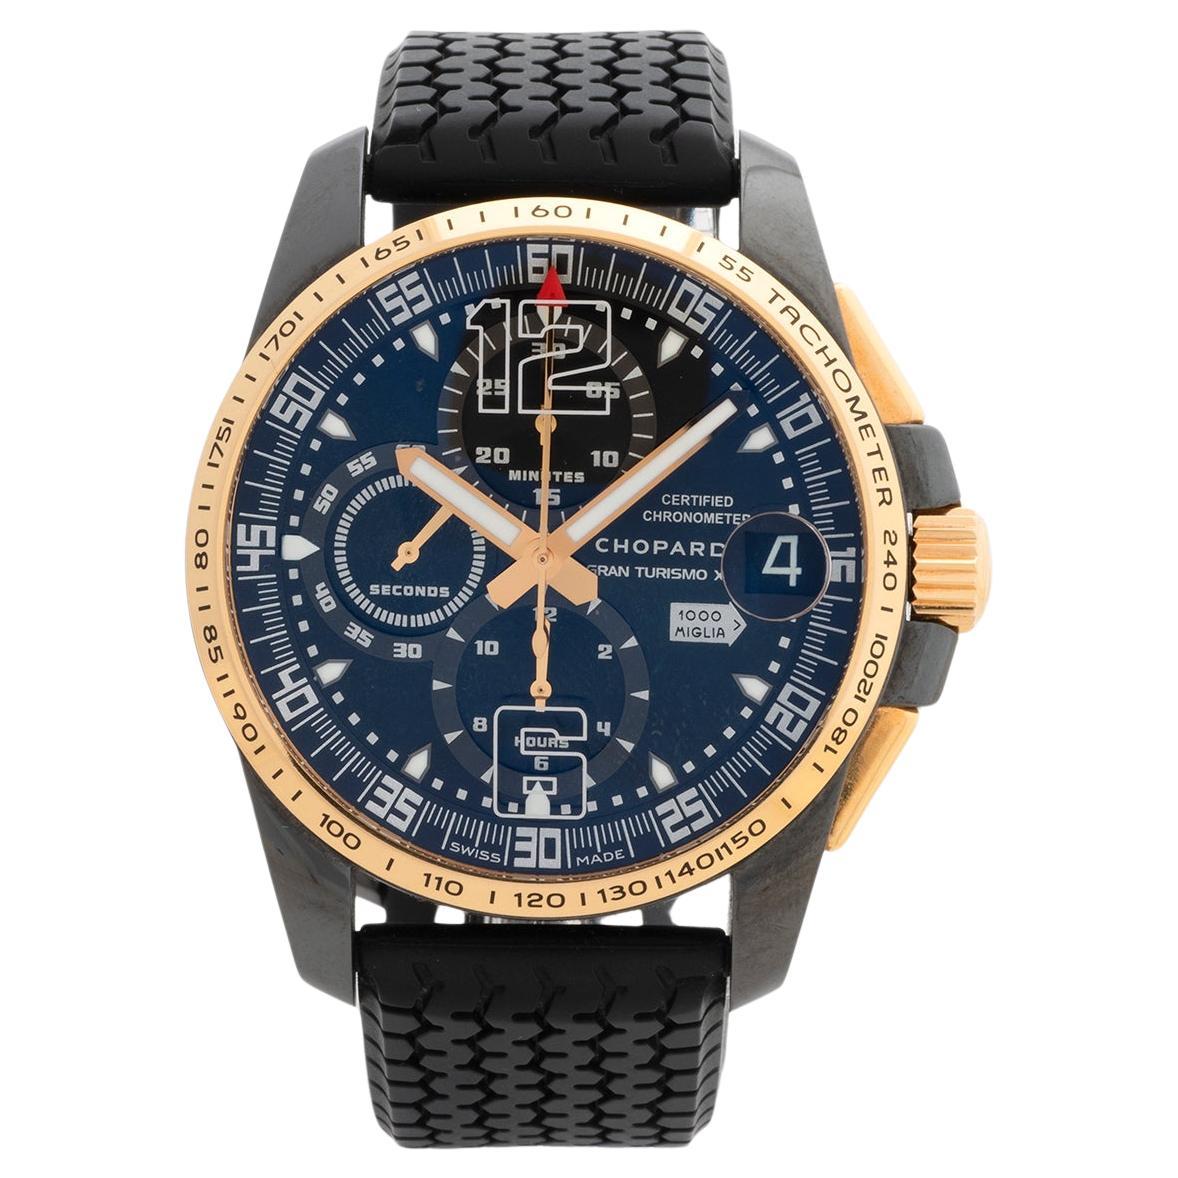 Chopard Mille Miglia Gran Turismo XL Chronograph Speed Black . Rose Gold, 2010. For Sale